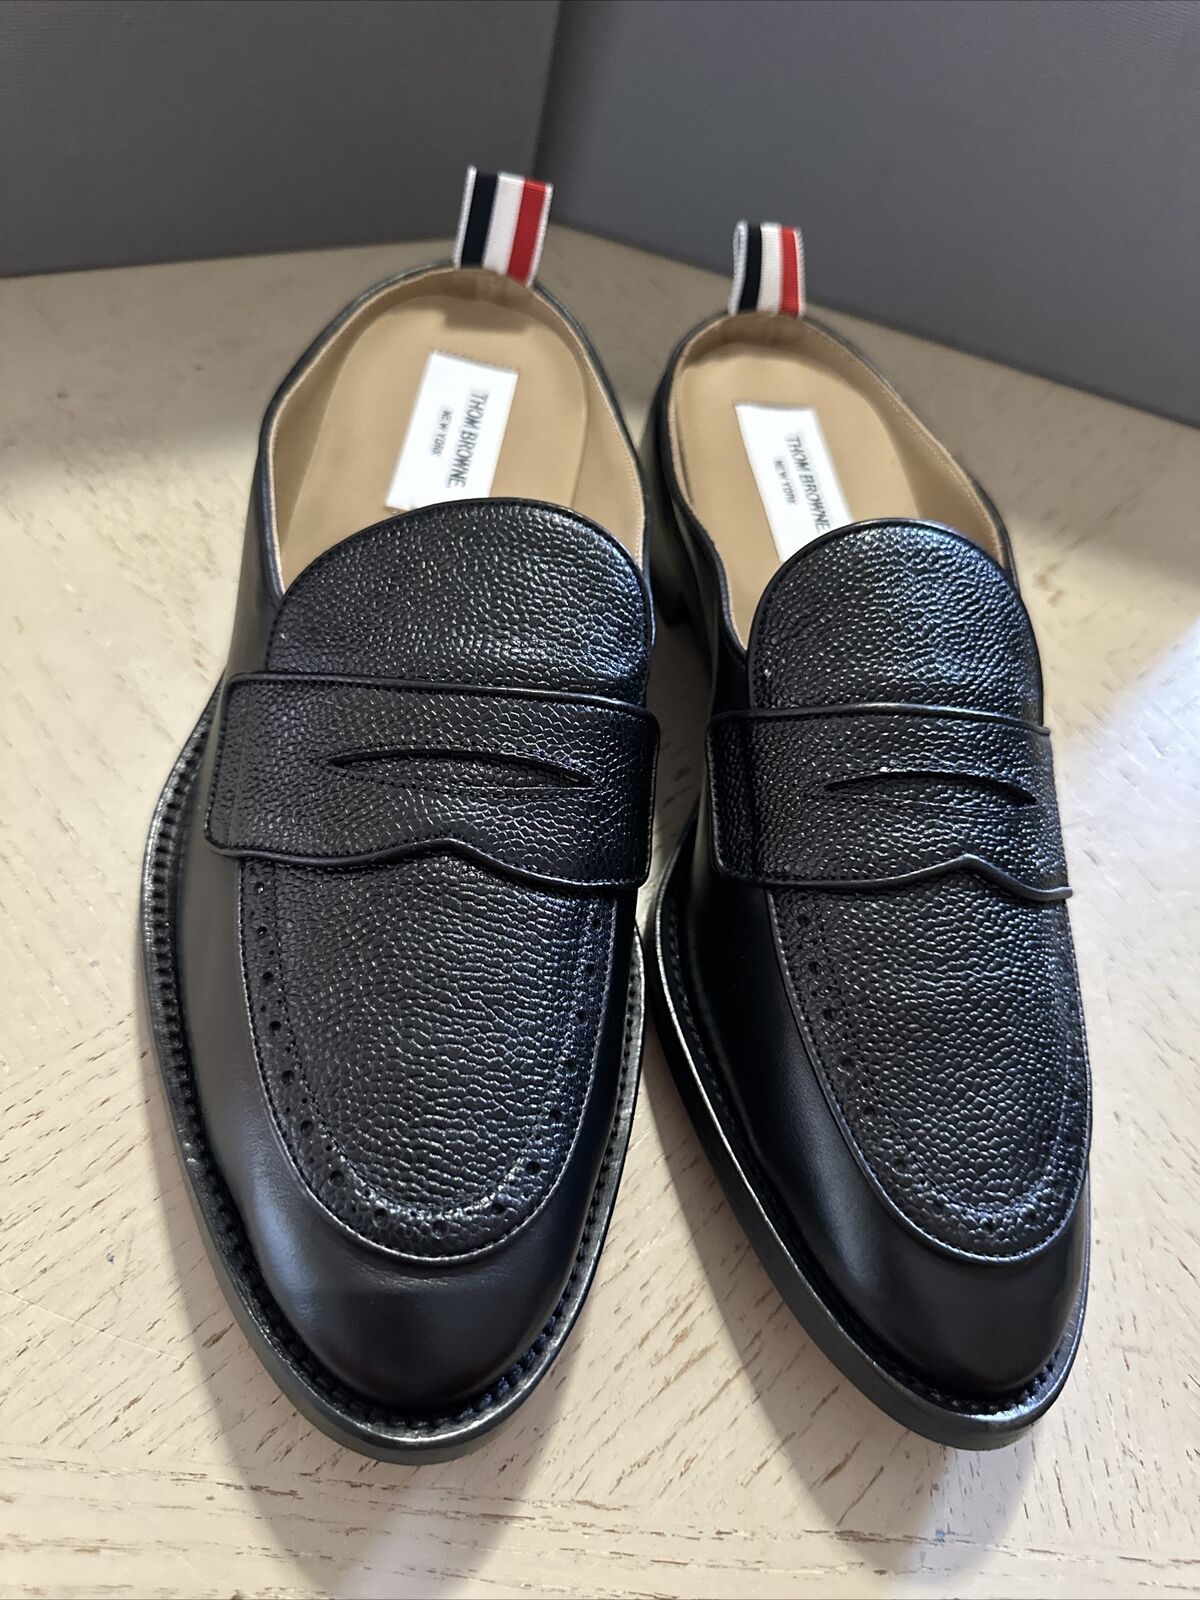 Thom Browne Men Leather Penny Loafers Sandal Shoes Black 11 US / 44 EU Italy New